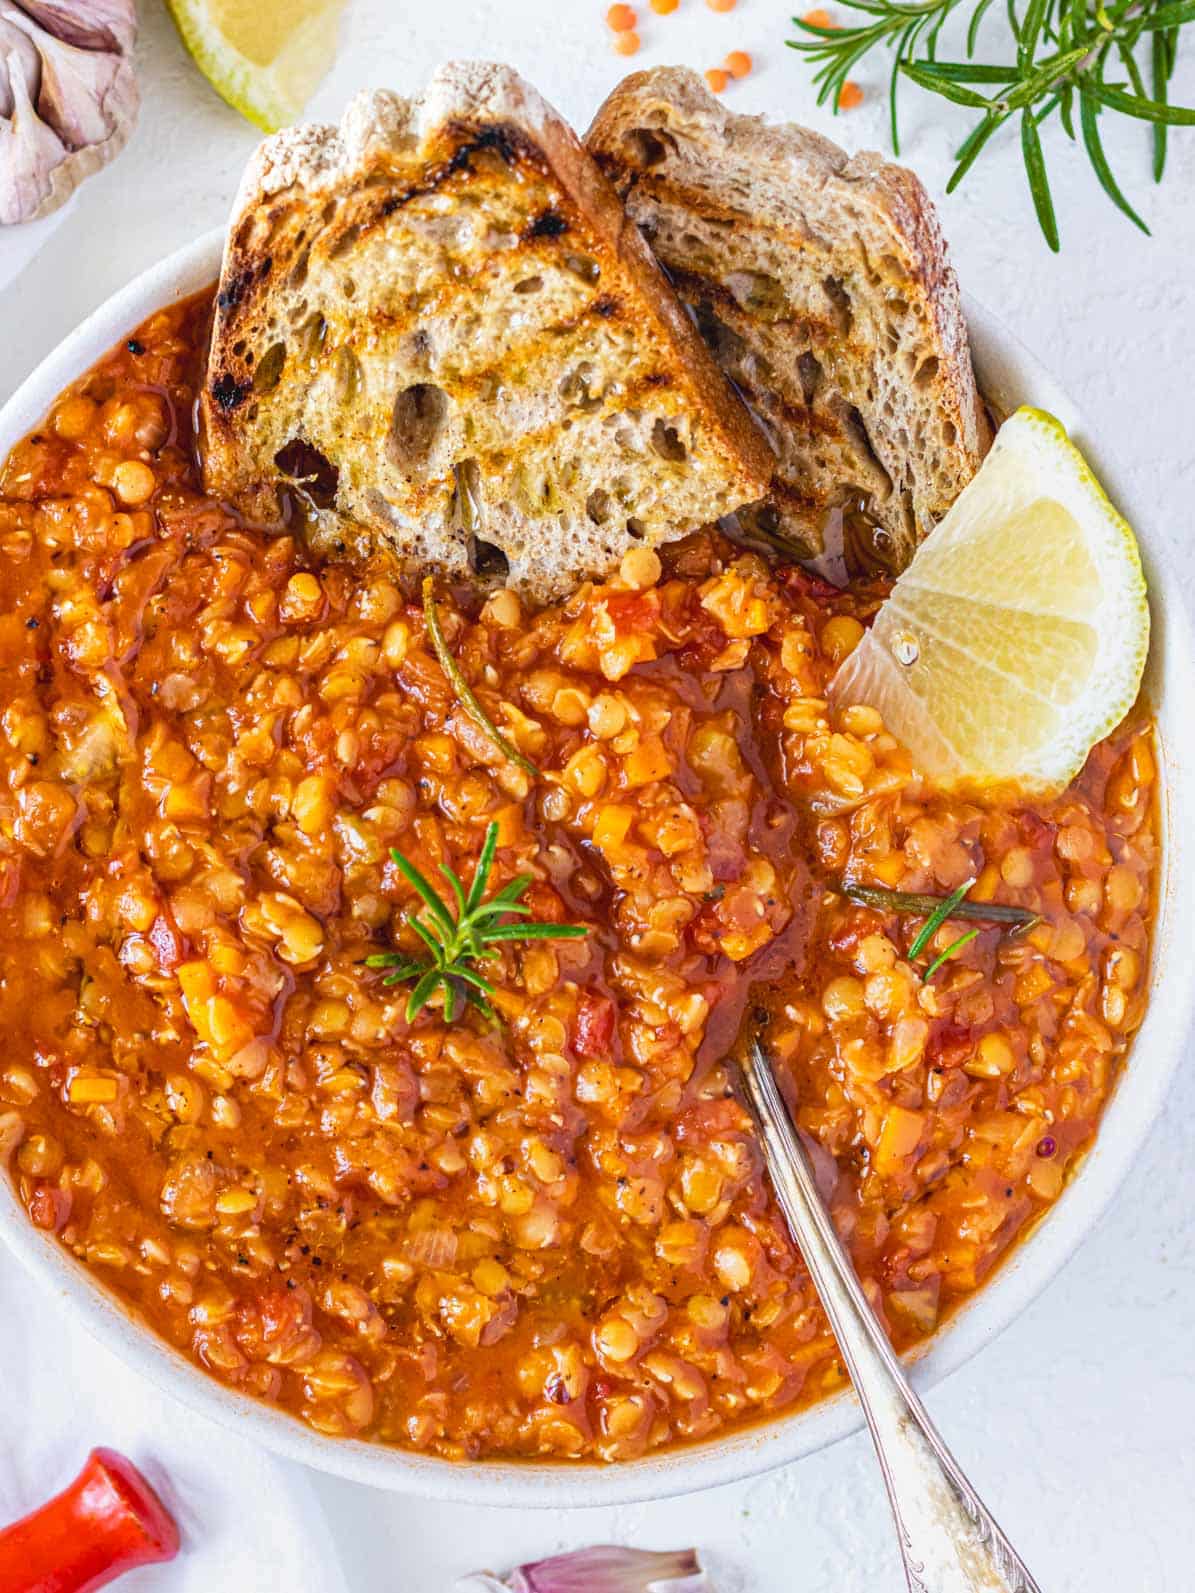 Red lentil soup with a lemon wedge